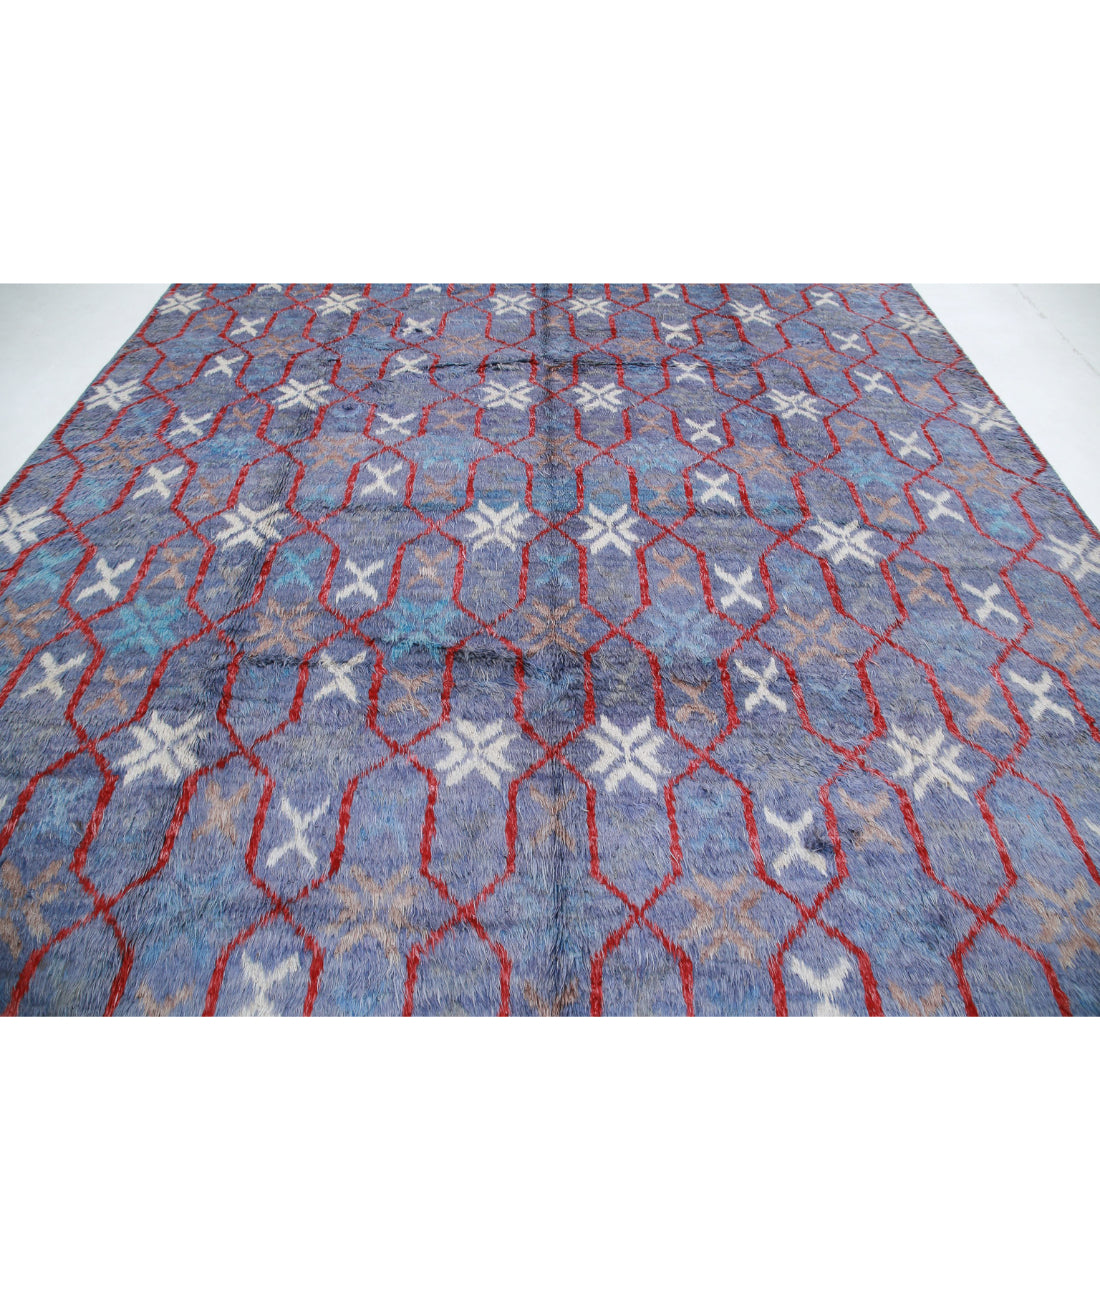 Hand Knotted Tribal Moroccan Wool Rug - 10'7'' x 13'9'' 10'7'' x 13'9'' (318 X 413) / Blue / Ivory